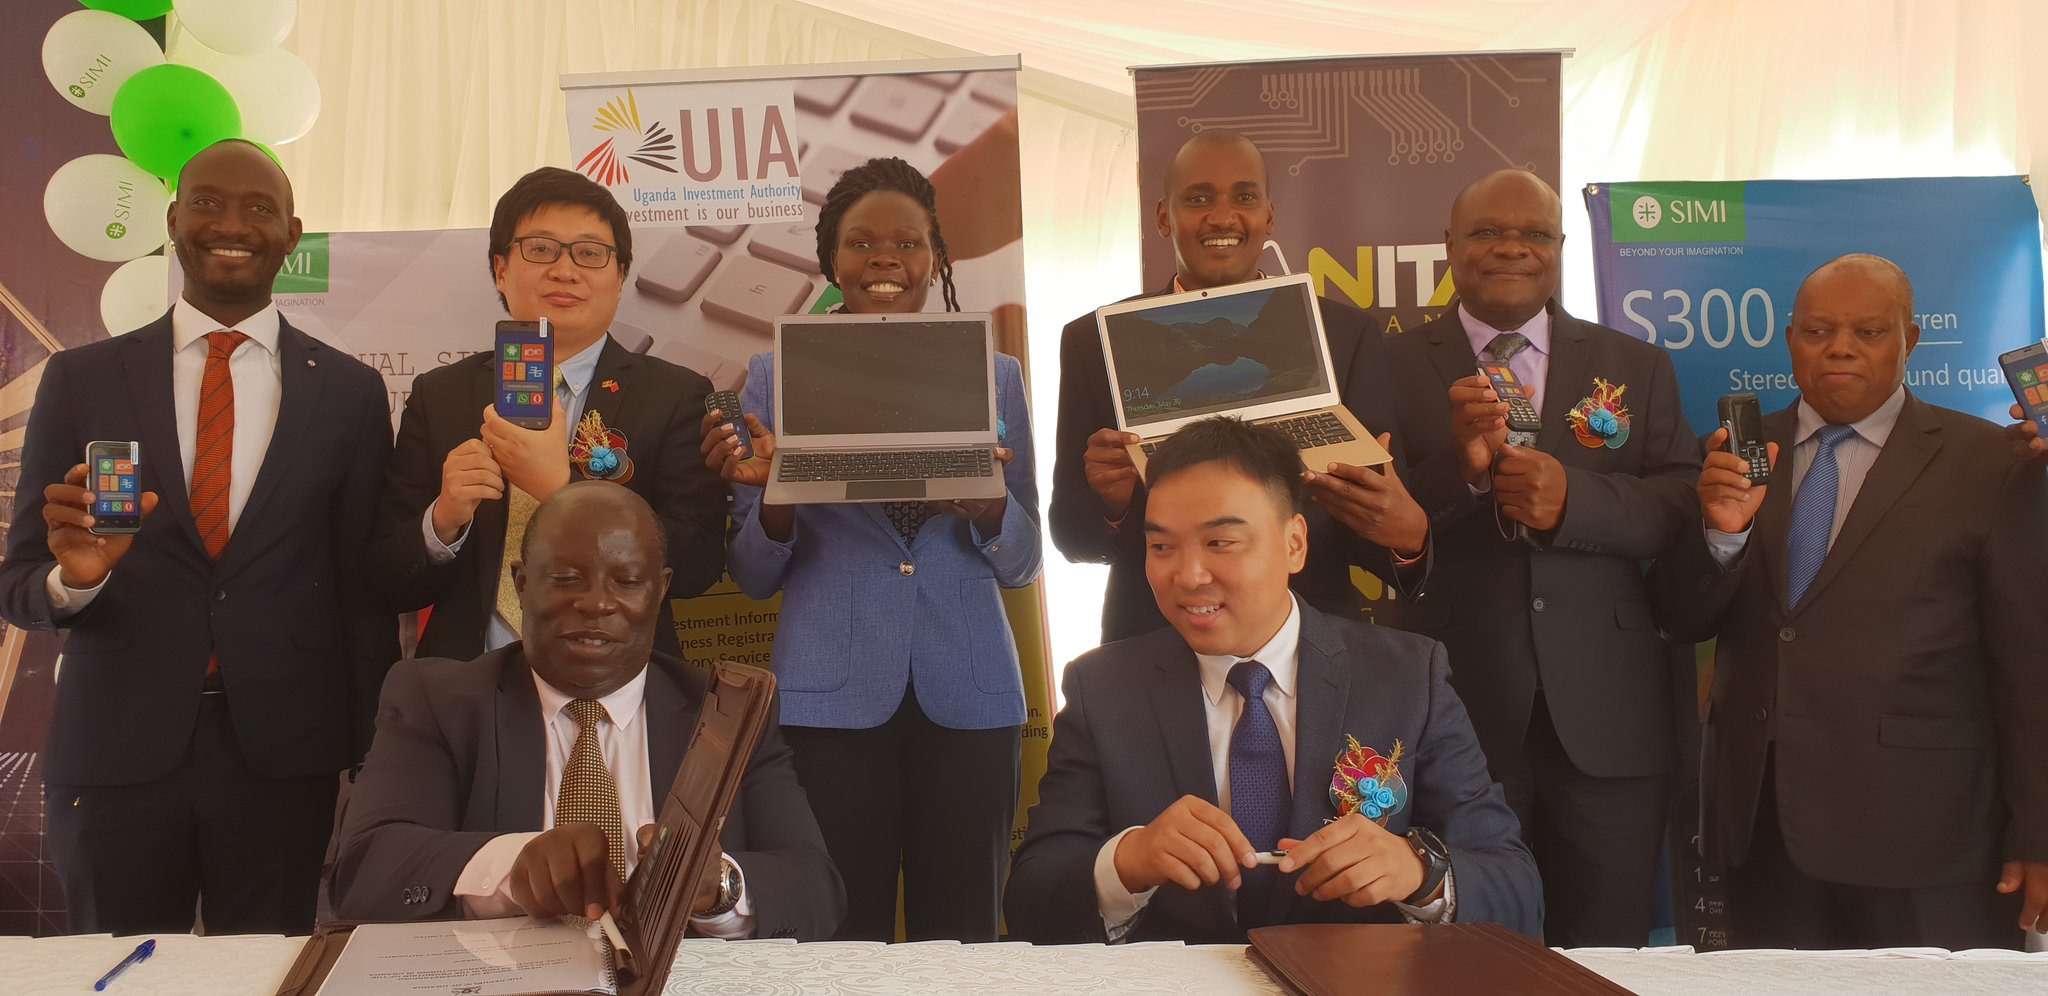 The government of Uganda and the SIMIX Technologies sign an MoU who will in partnership with NITA Uganda to start the production of own computers and mobile phones.